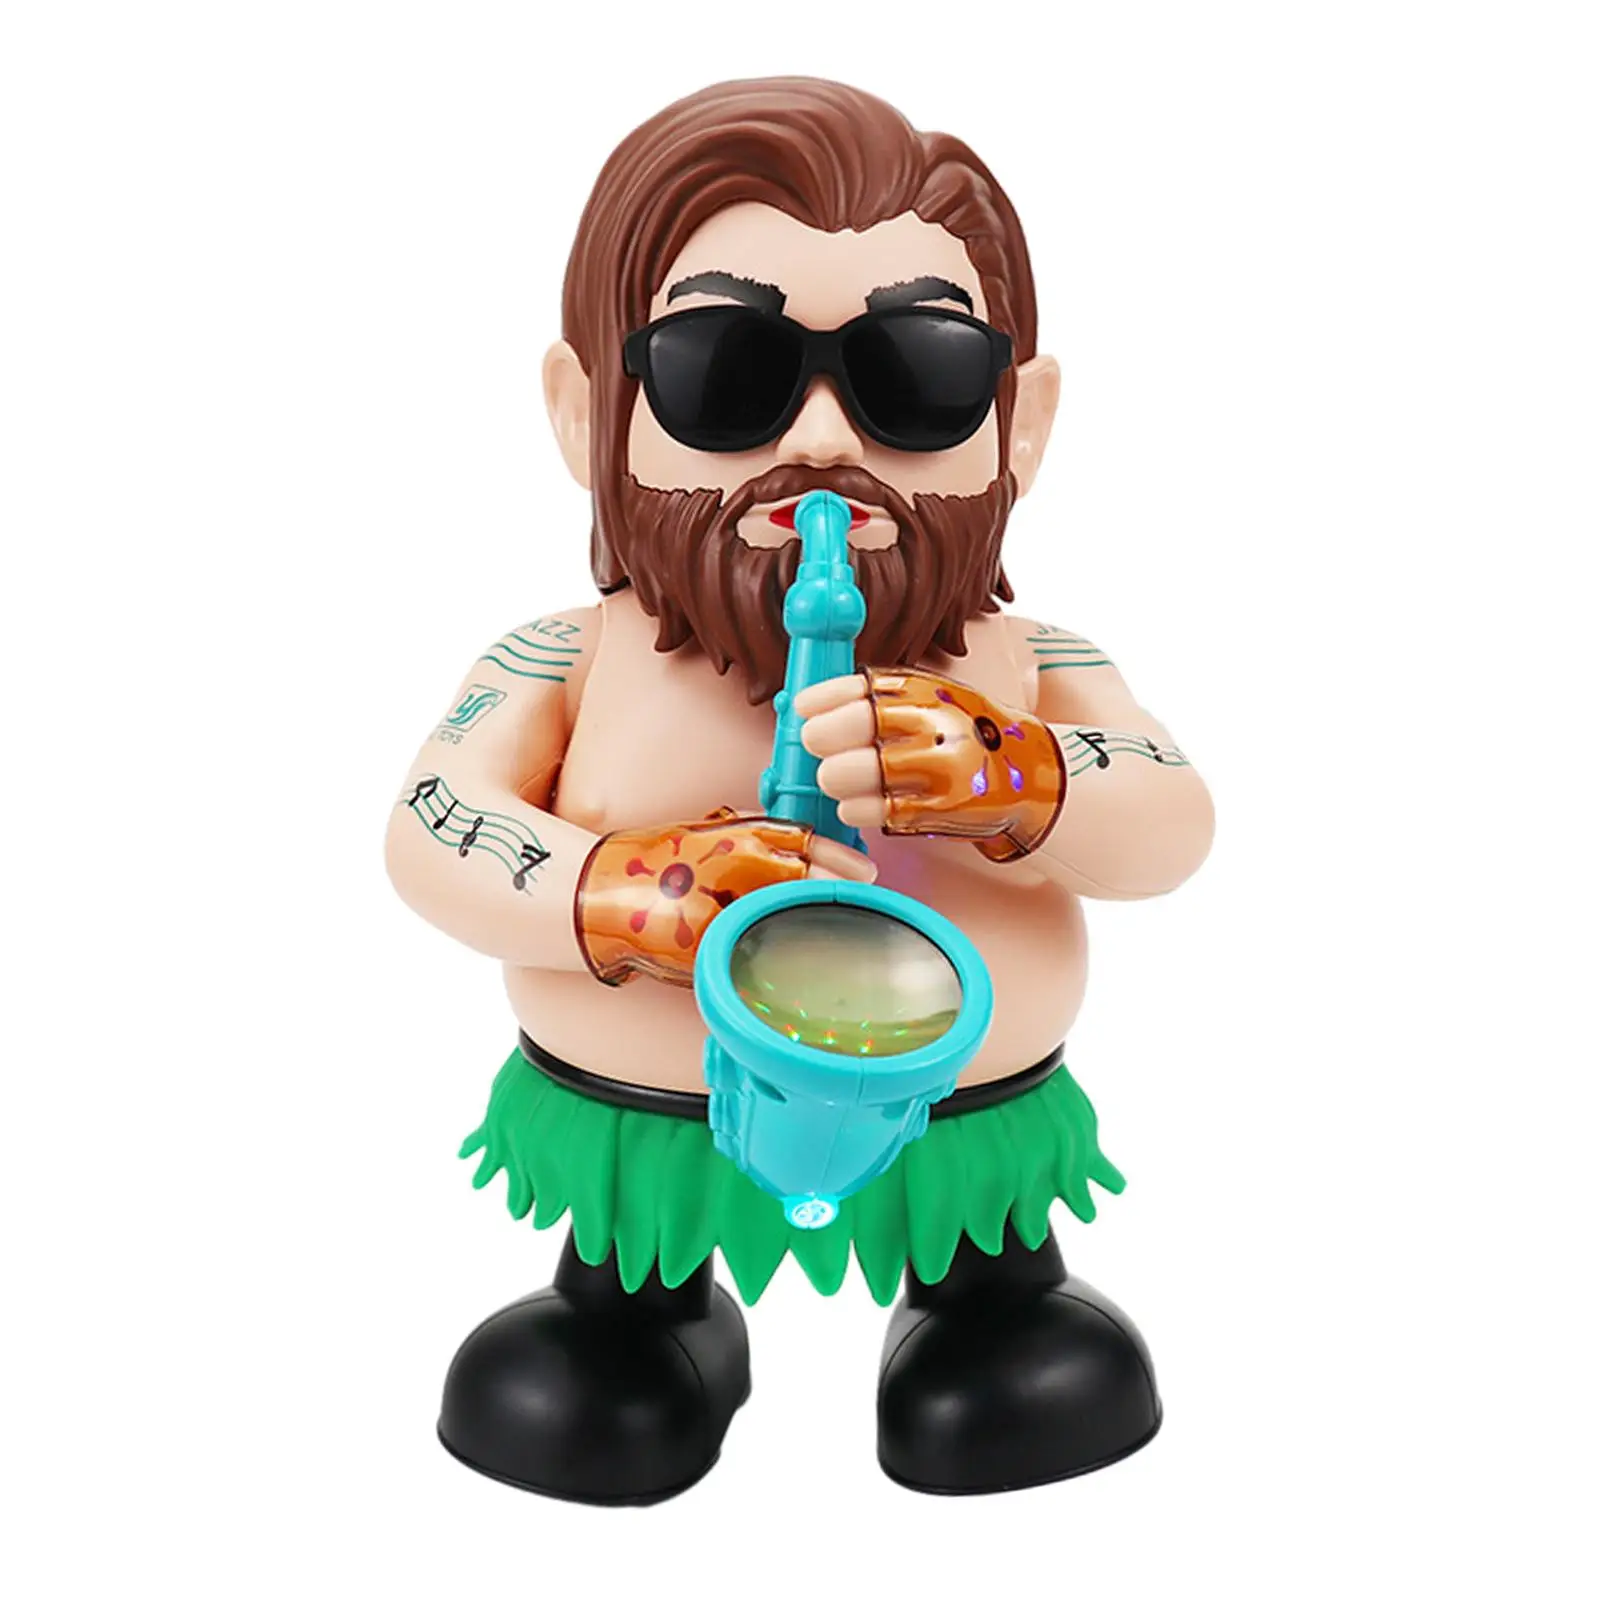 Funny Electric Dancing Saxophonist Toy with Music and Light Play Saxophone Toy for Boys Girls Kids Children Holiday Gifts